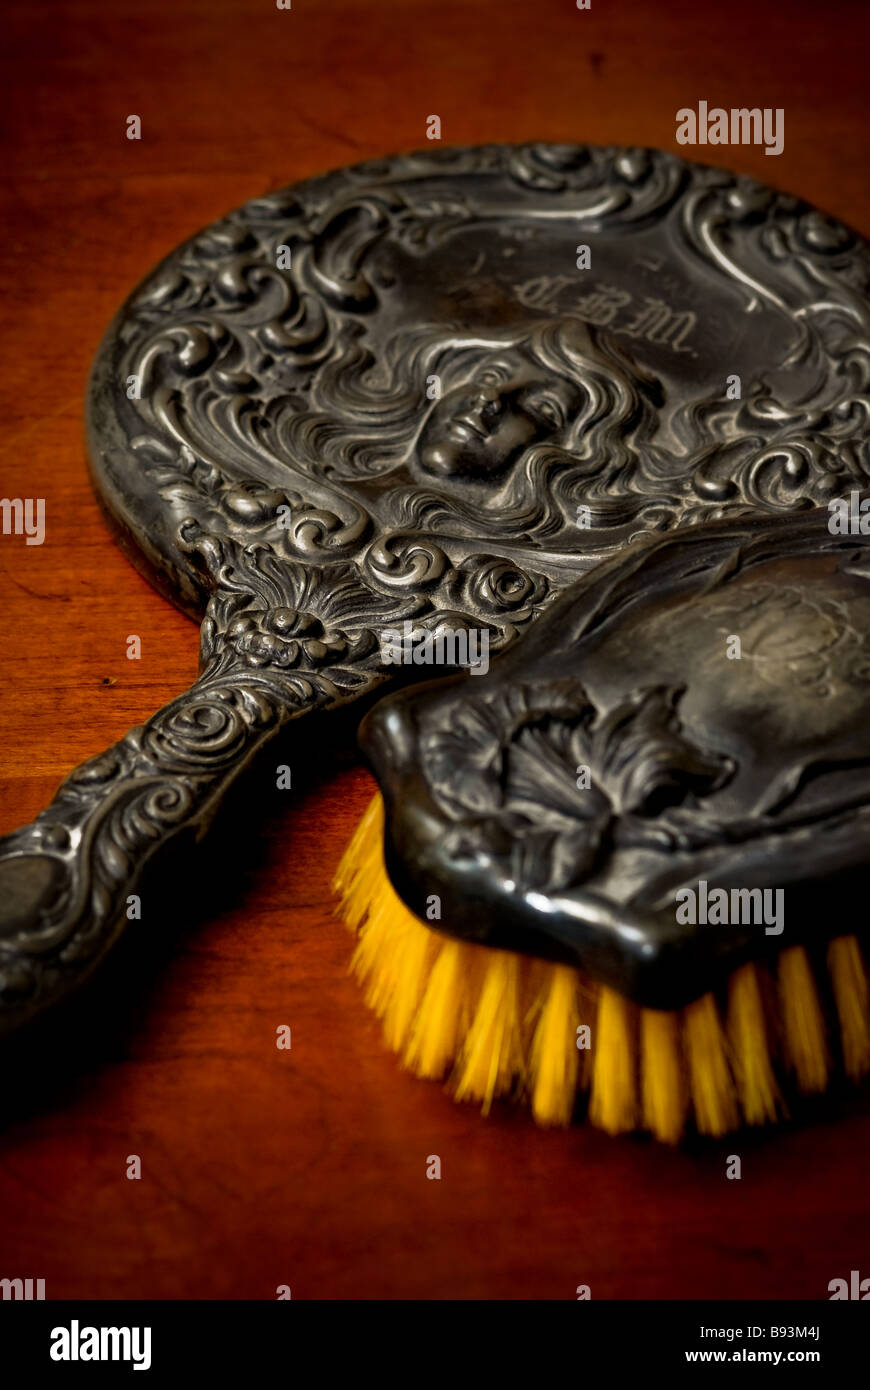 Still life of an antique brush and hand mirror with an ornate design of a woman with long locks of hair. Stock Photo